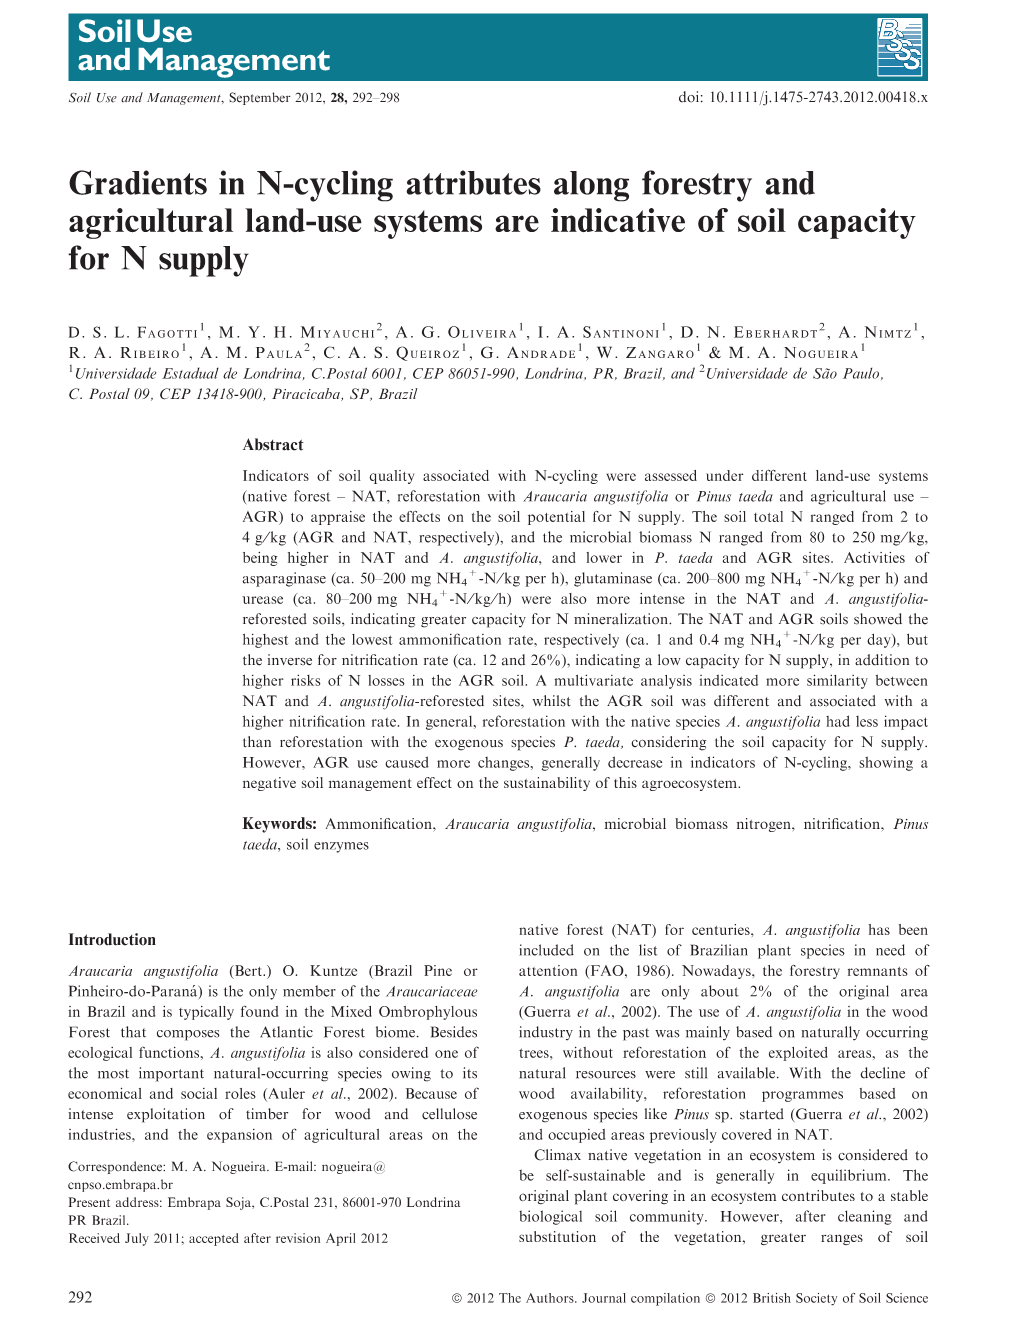 Gradients in Ncycling Attributes Along Forestry and Agricultural Landuse Systems Are Indicative of Soil Capacity for N Supply